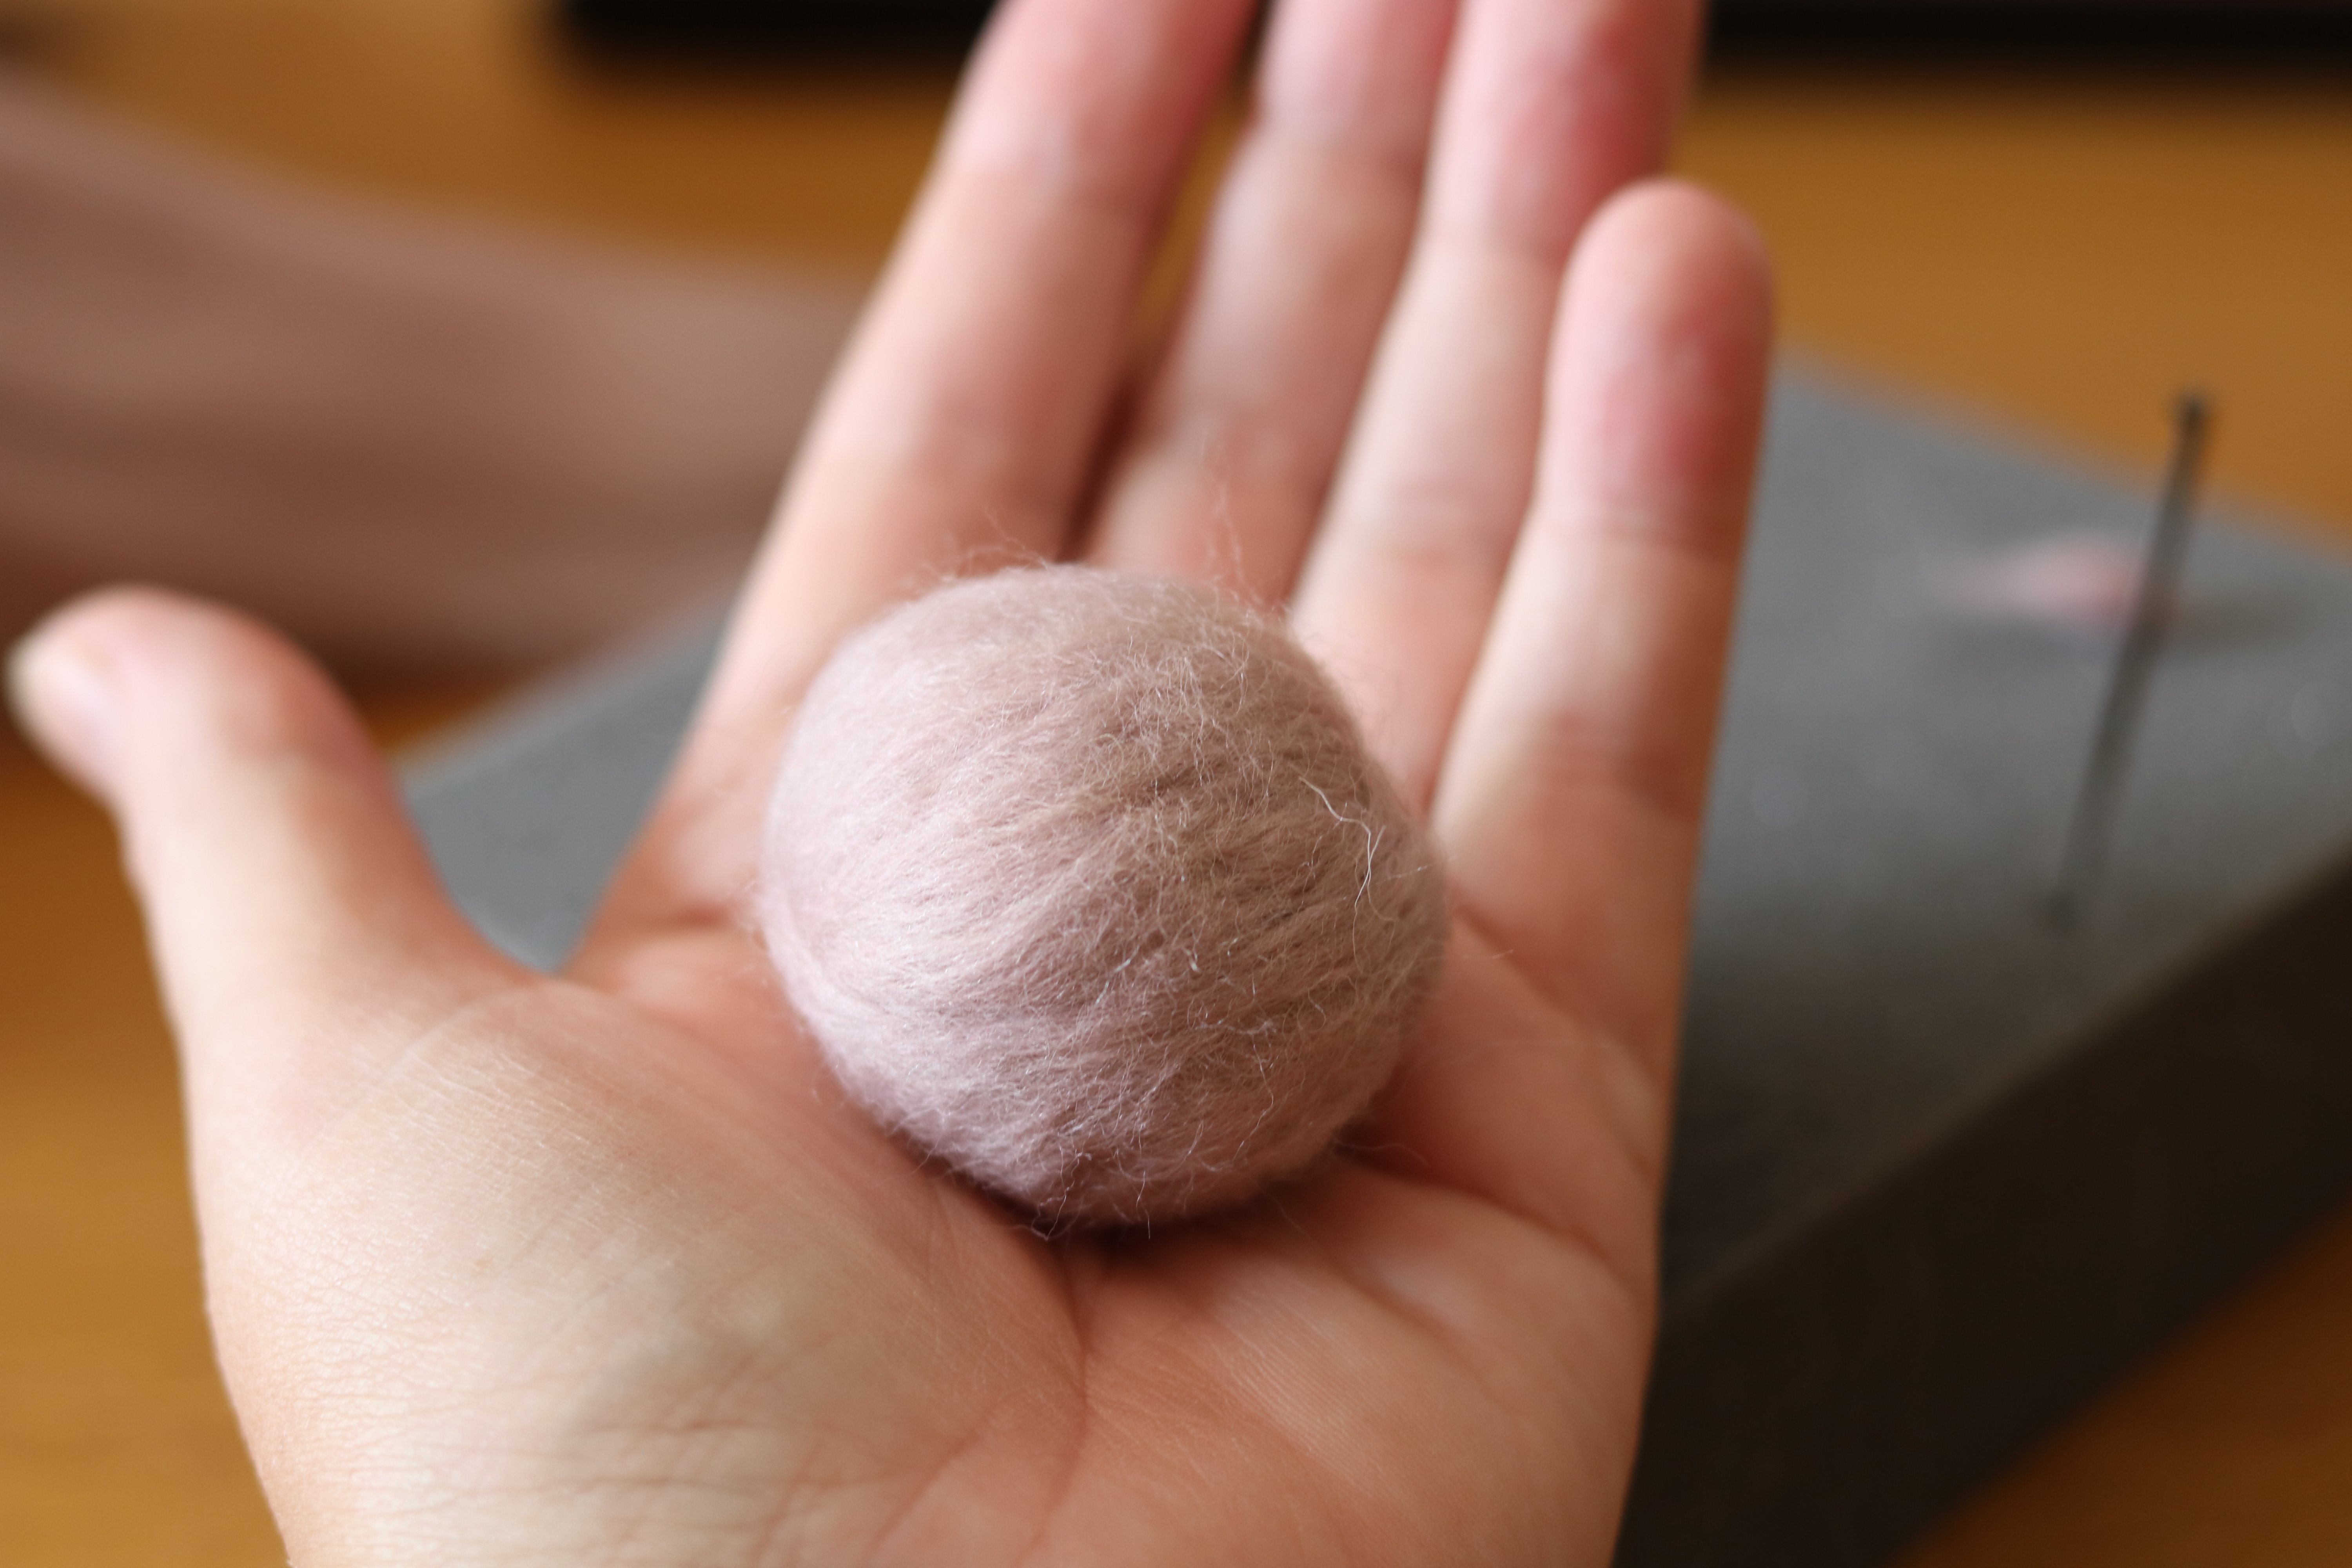 A person's hand displaying a small, round, pink felted wool ball, with a needle felting pad and felting needle in the background on a wooden surface.